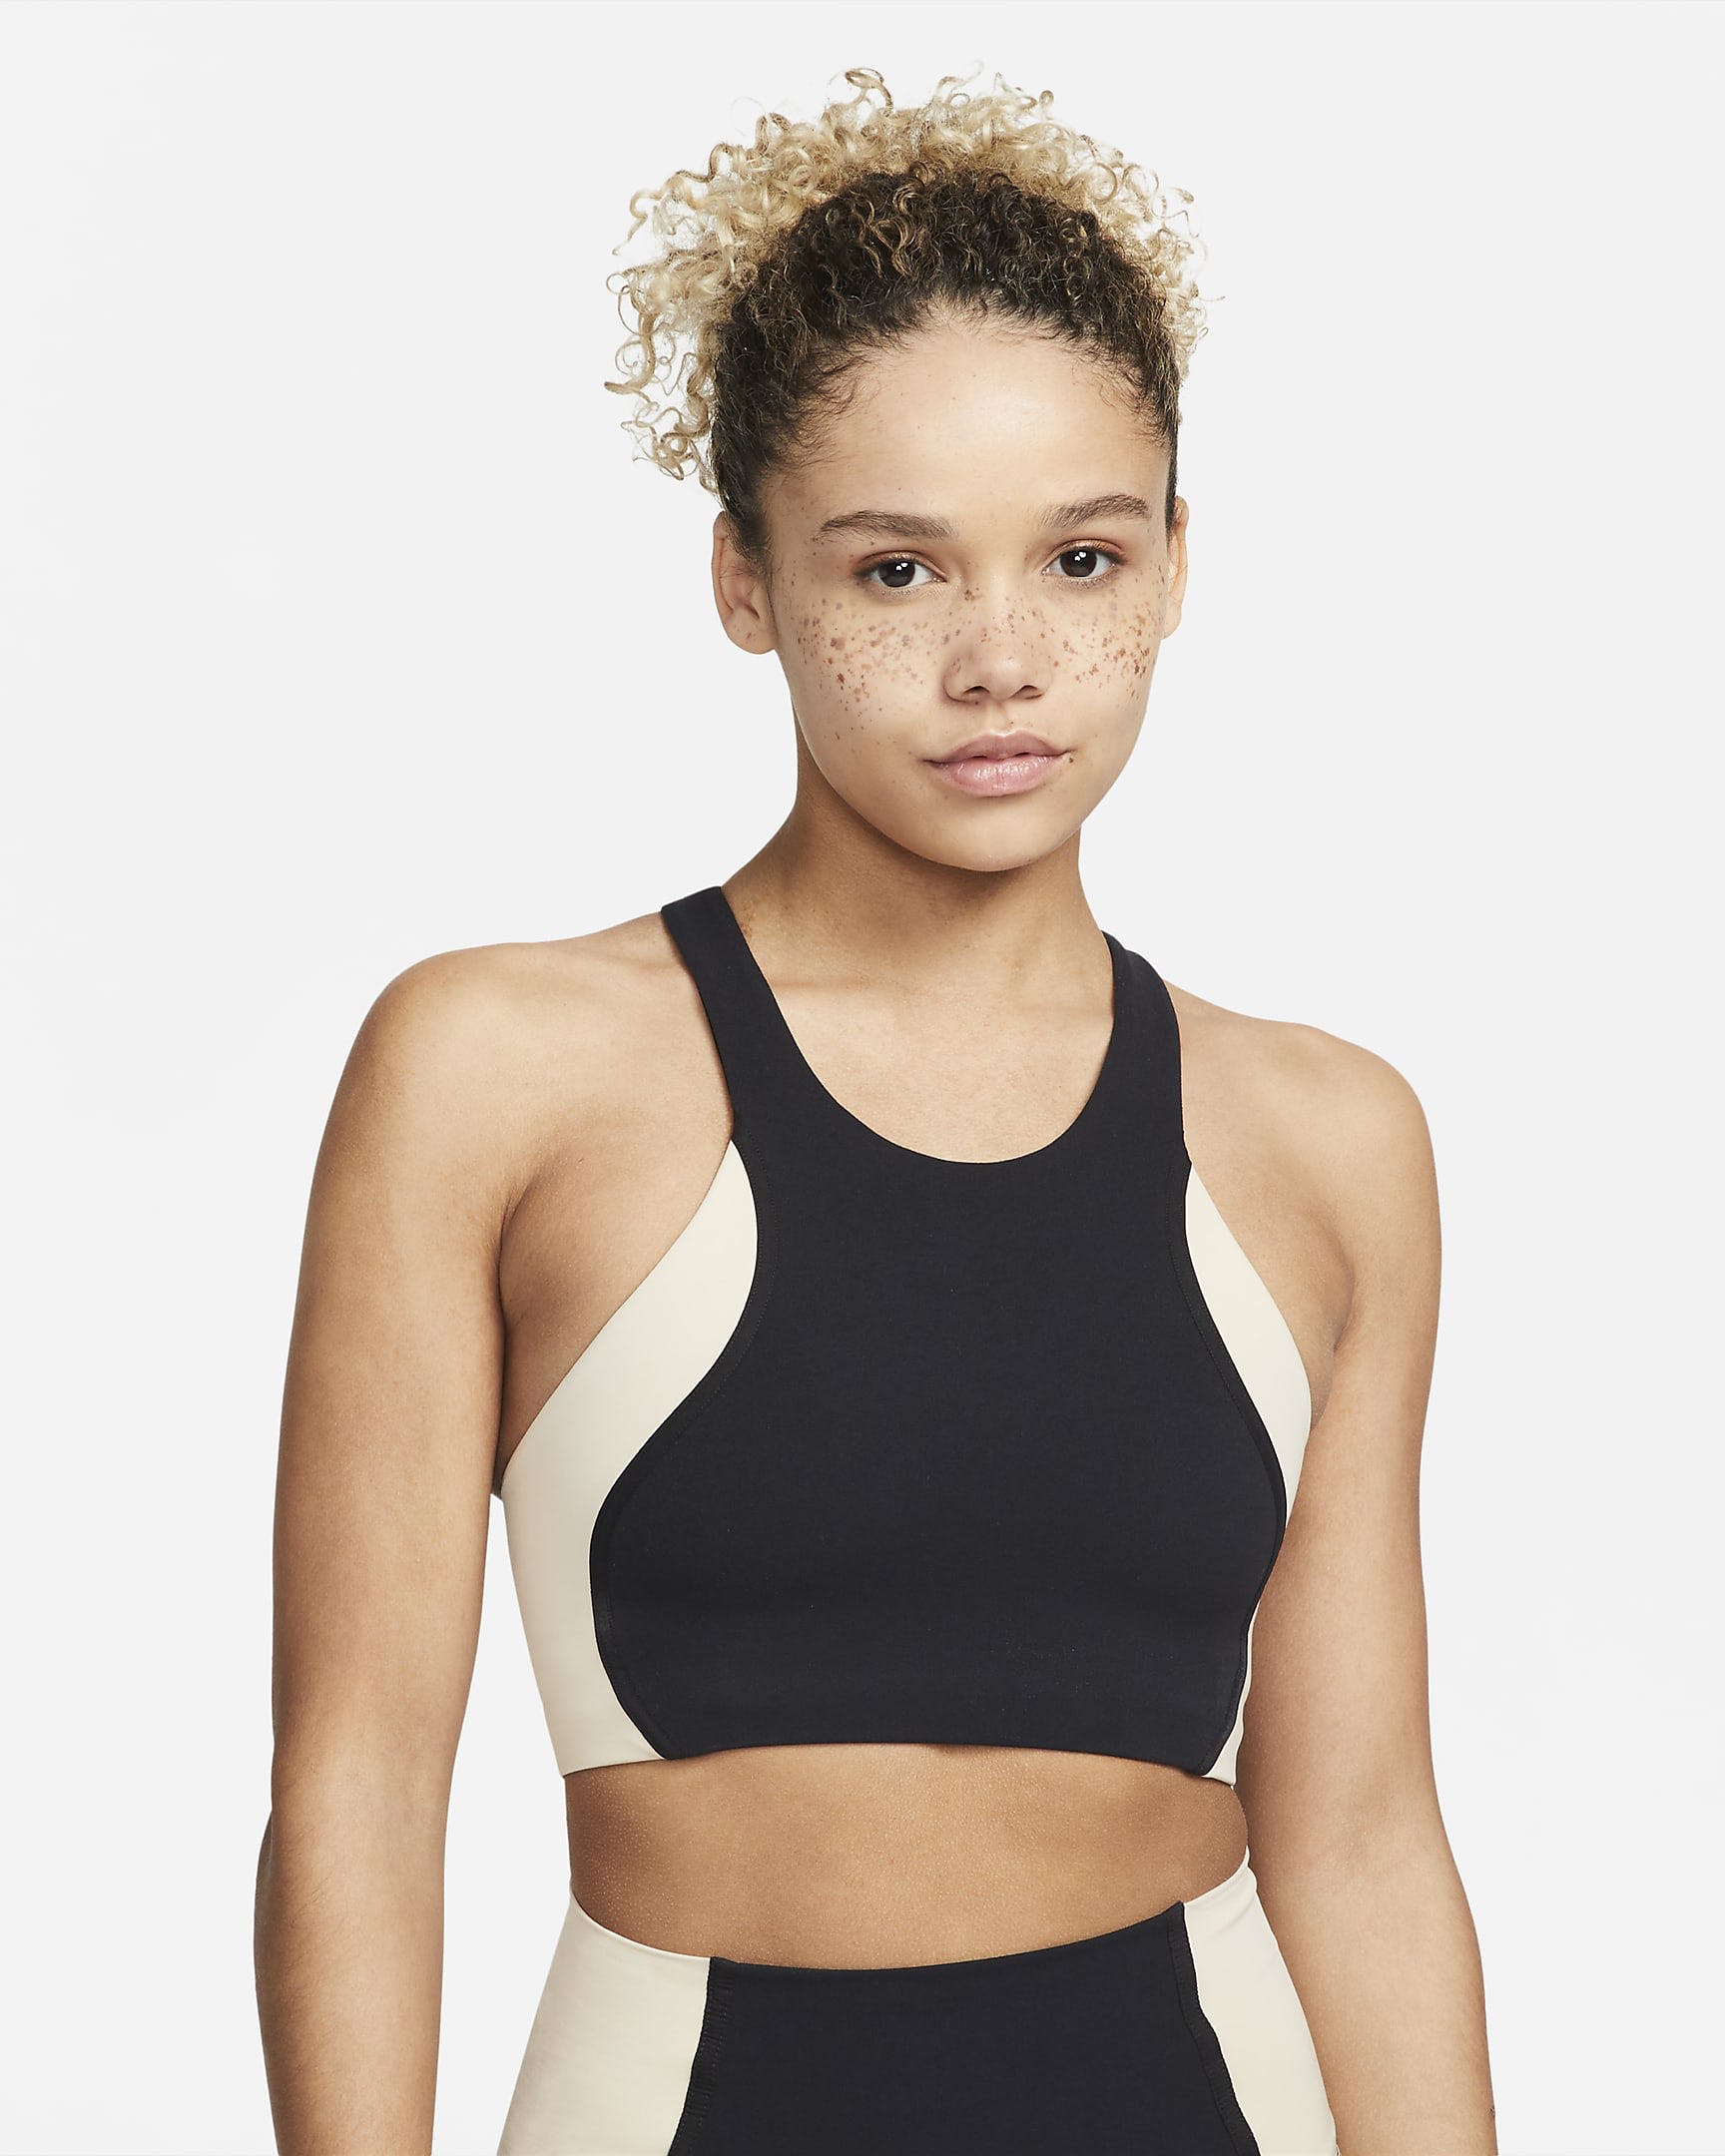 This Or That: Find Out Which Sports Bra Is Better? | LBB